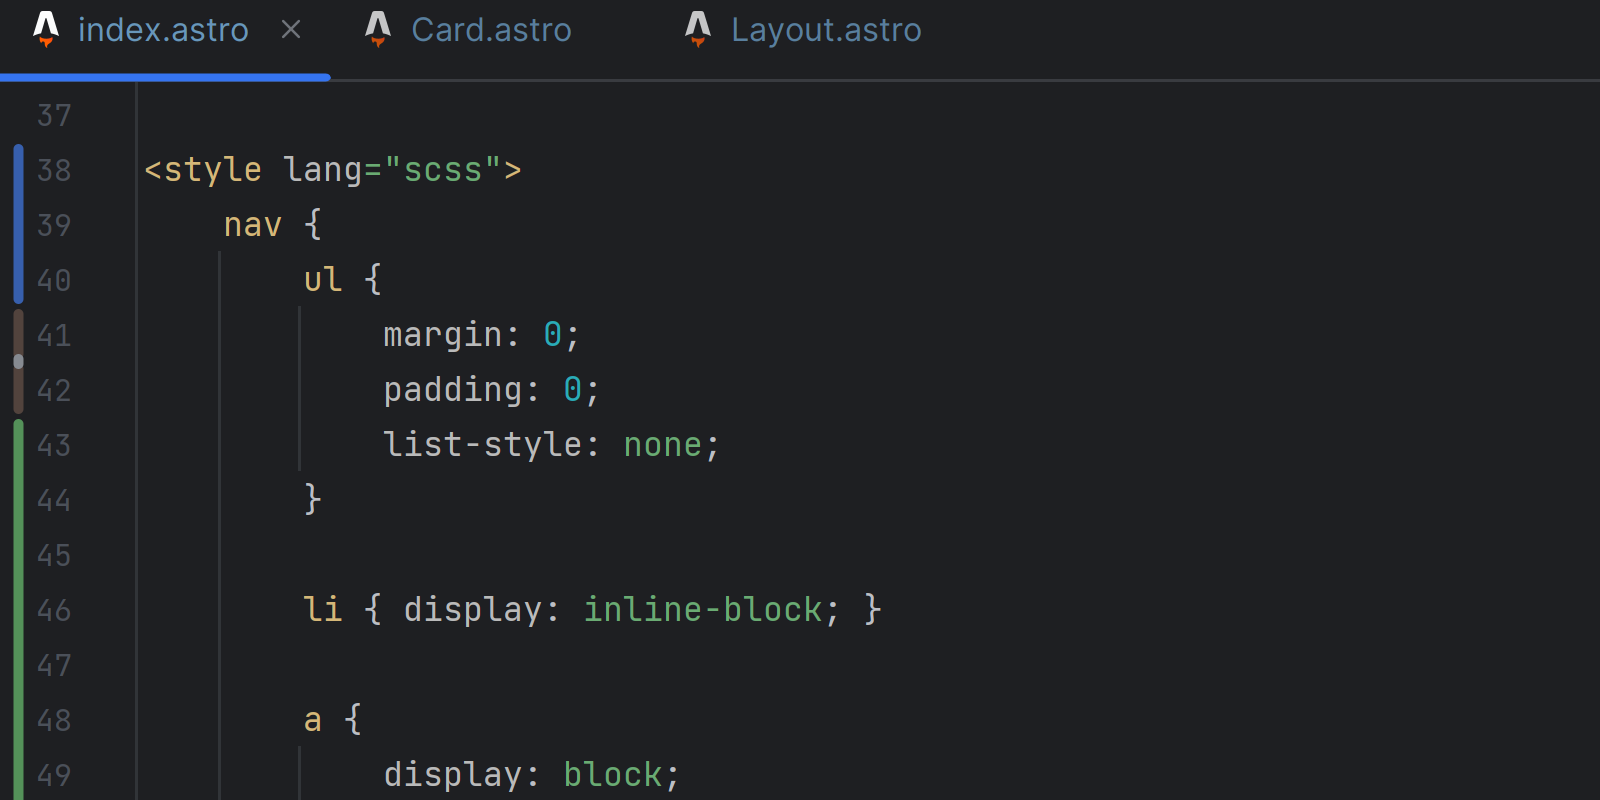 Showing the scss style is present in the Astro file 